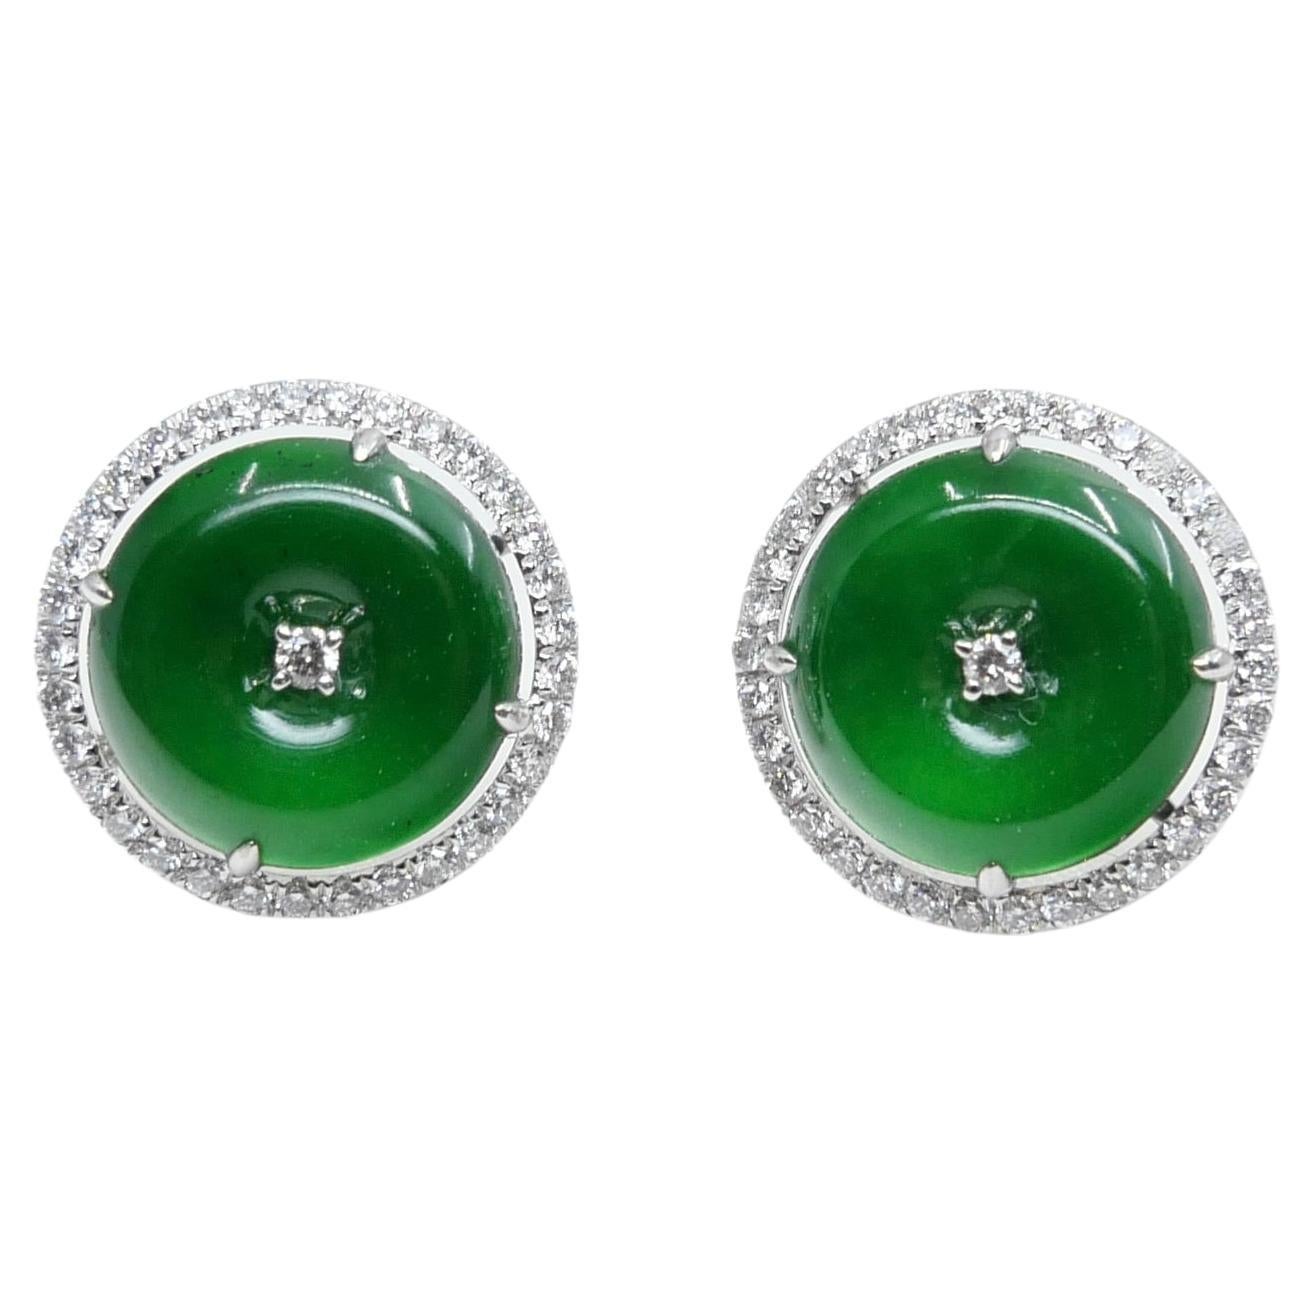 Certified Natural Type A Jadeite Jade And Diamond Earrings. Apple Green Color For Sale